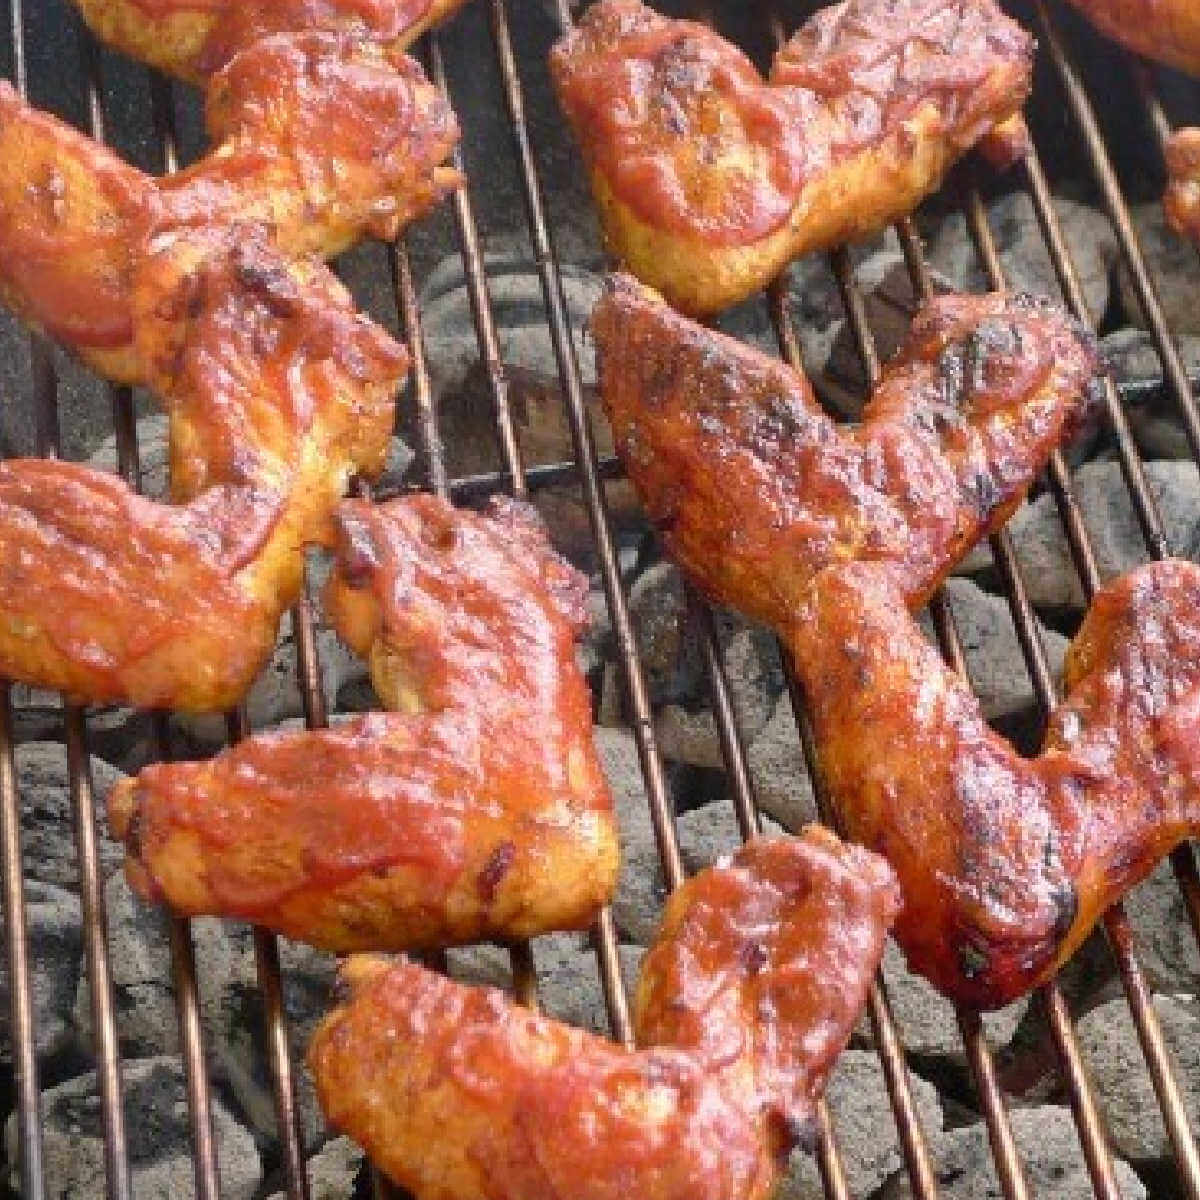 Close up of barbecued chicken on round grill grate cooking.